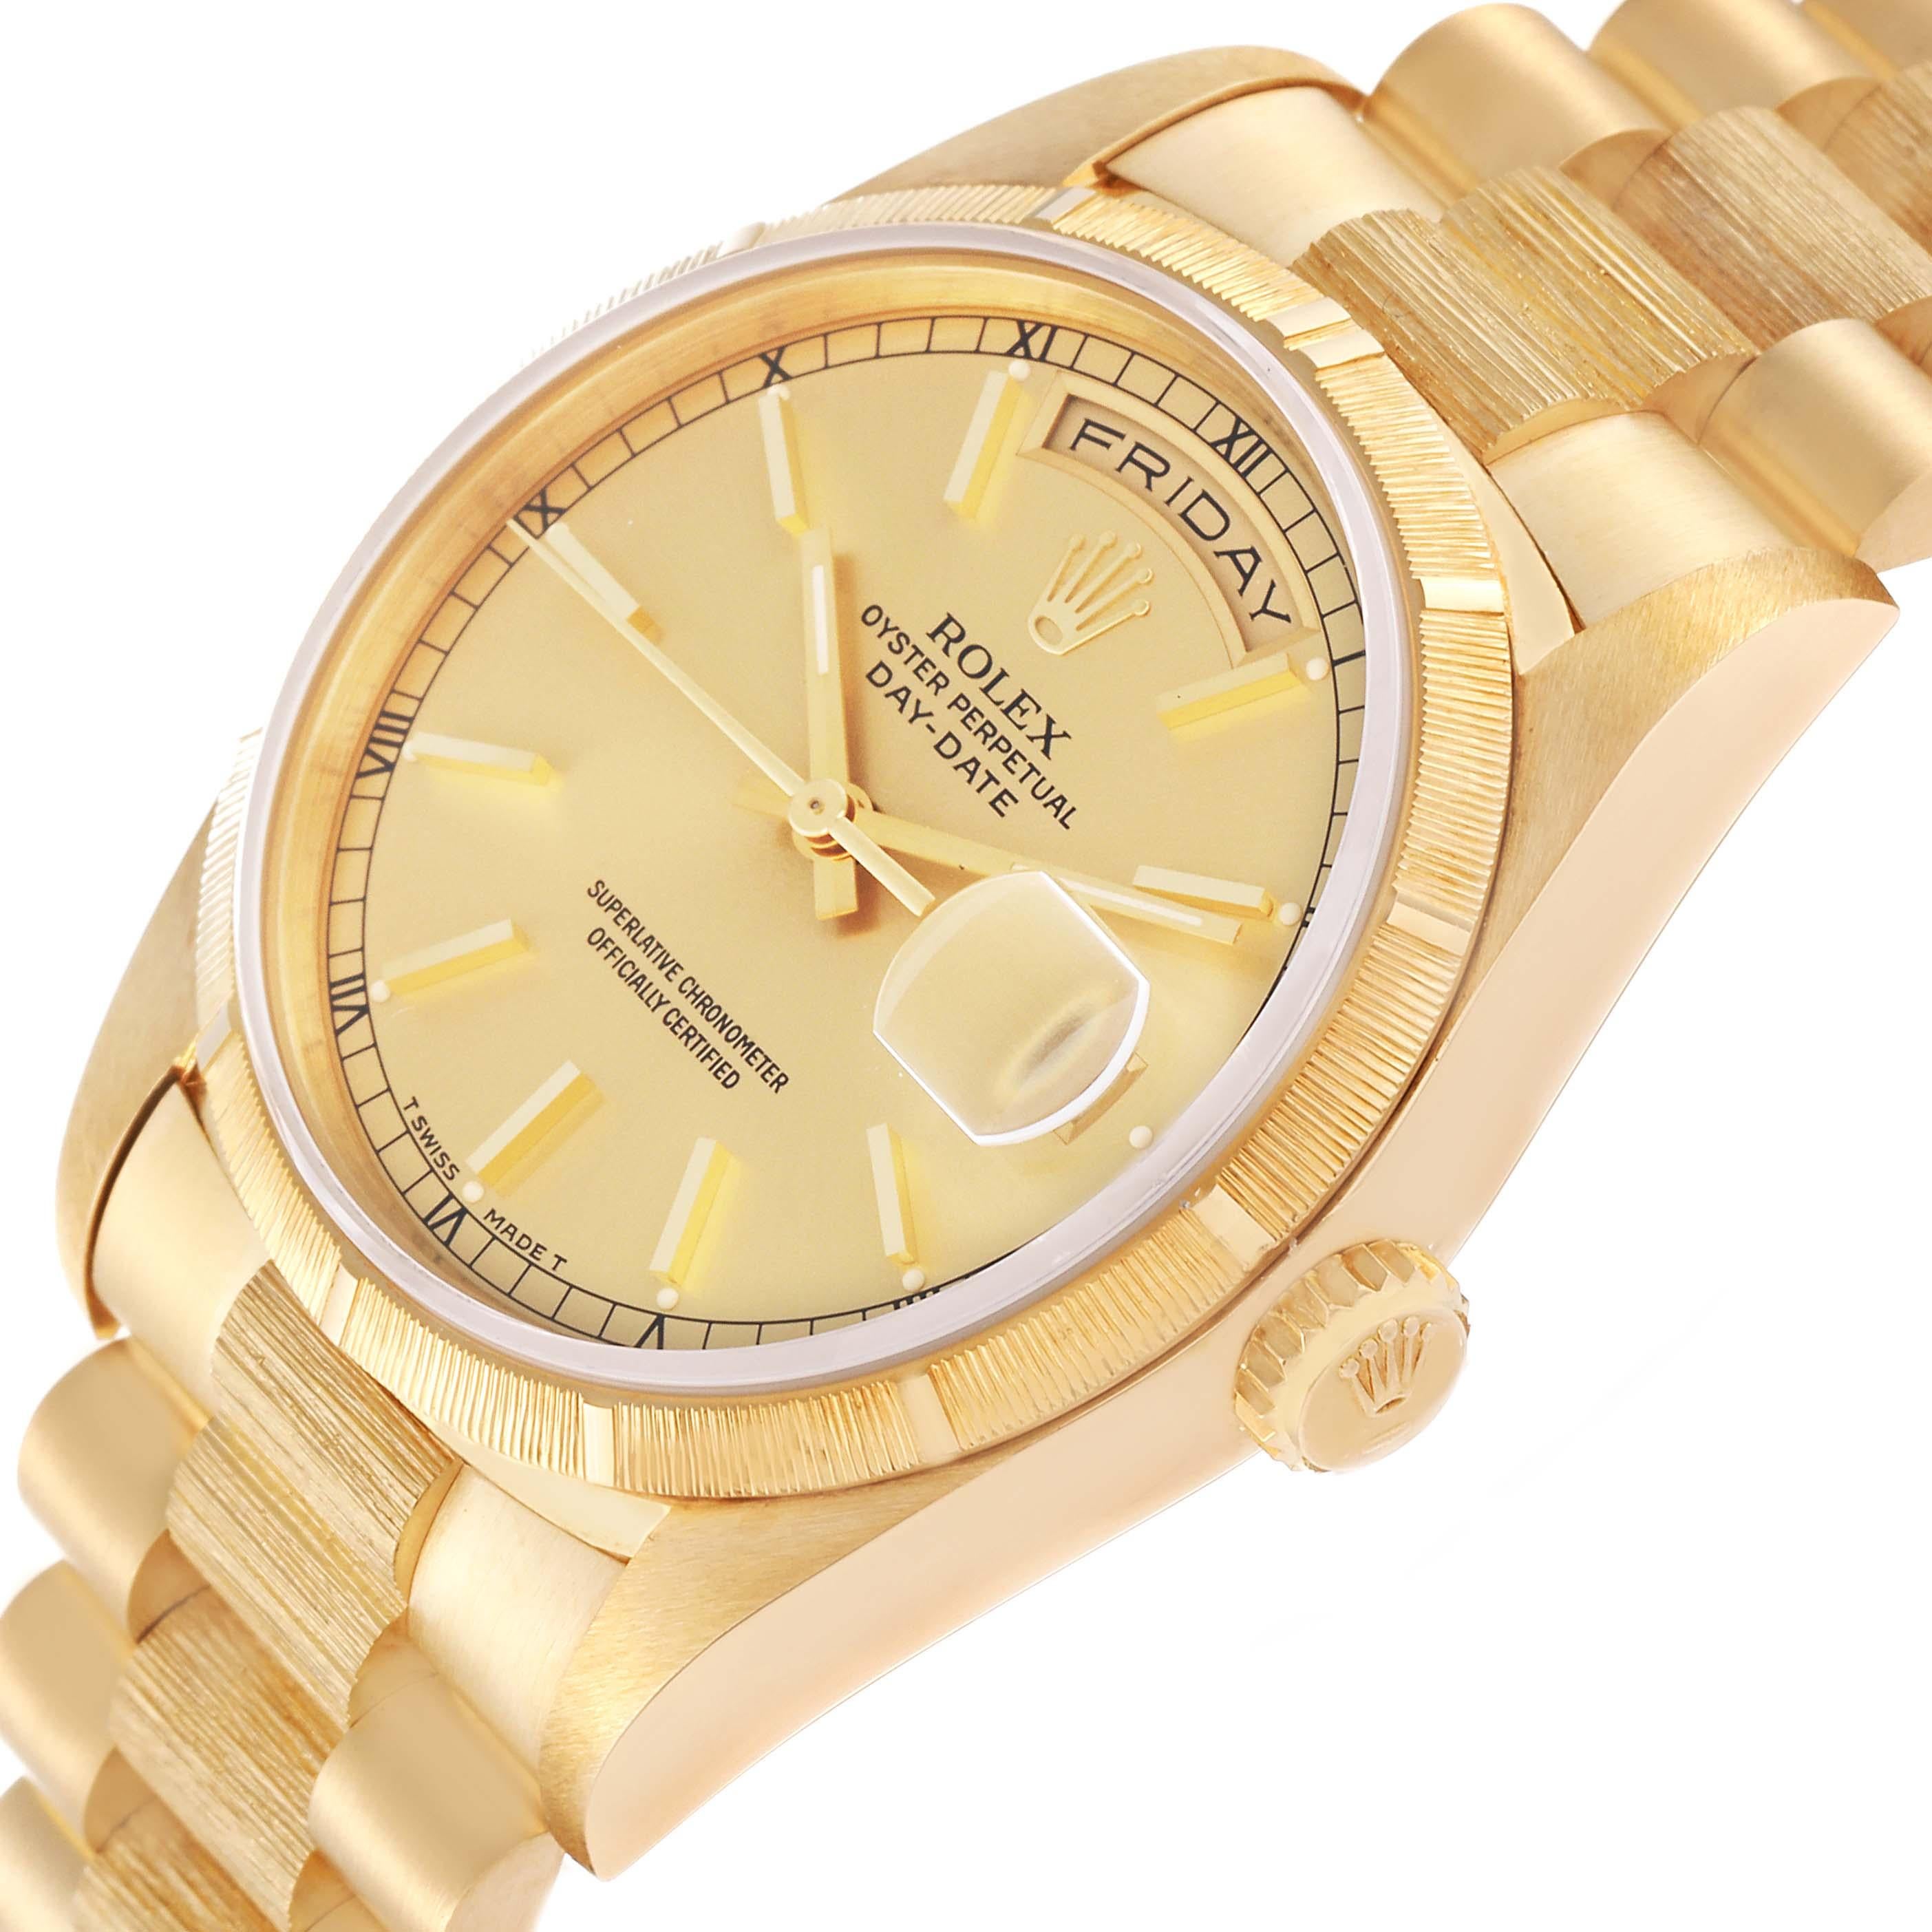 Rolex Day-Date President Yellow Gold Bark Finish Mens Watch 18248 For Sale 4